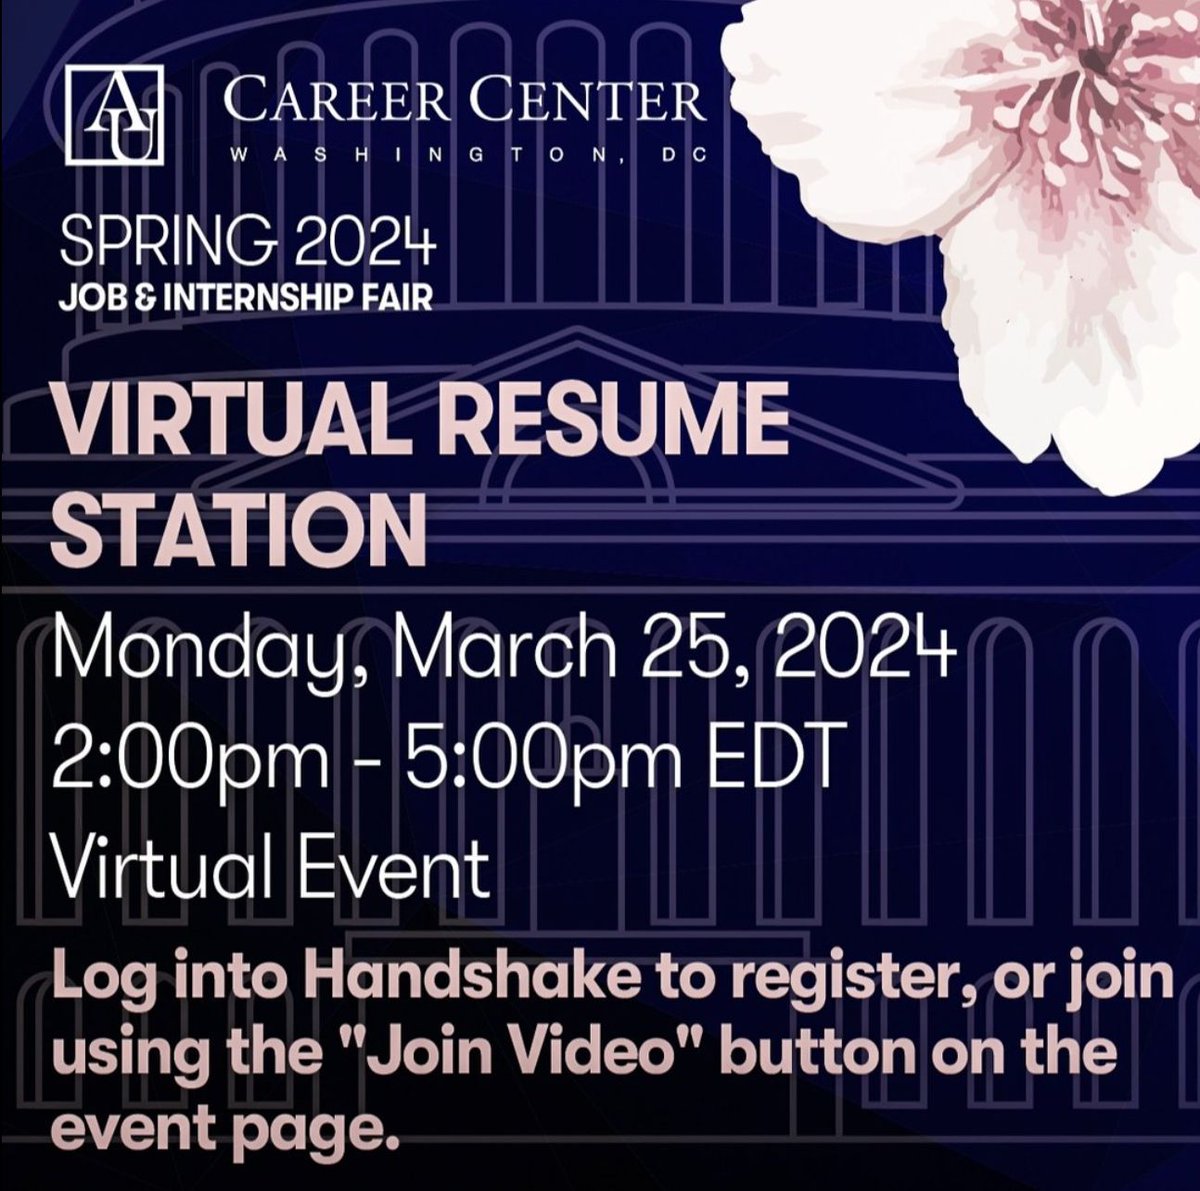 Want to fine-tune your resume in preparation for the virtual Job & Internship Fair on March 27th? Drop by for a 15-minute virtual resume review. Slots are available on a first-come, first-served basis. Register now american.joinhandshake.com/stu/events/144… @AU_SOC @AUCareerCenter